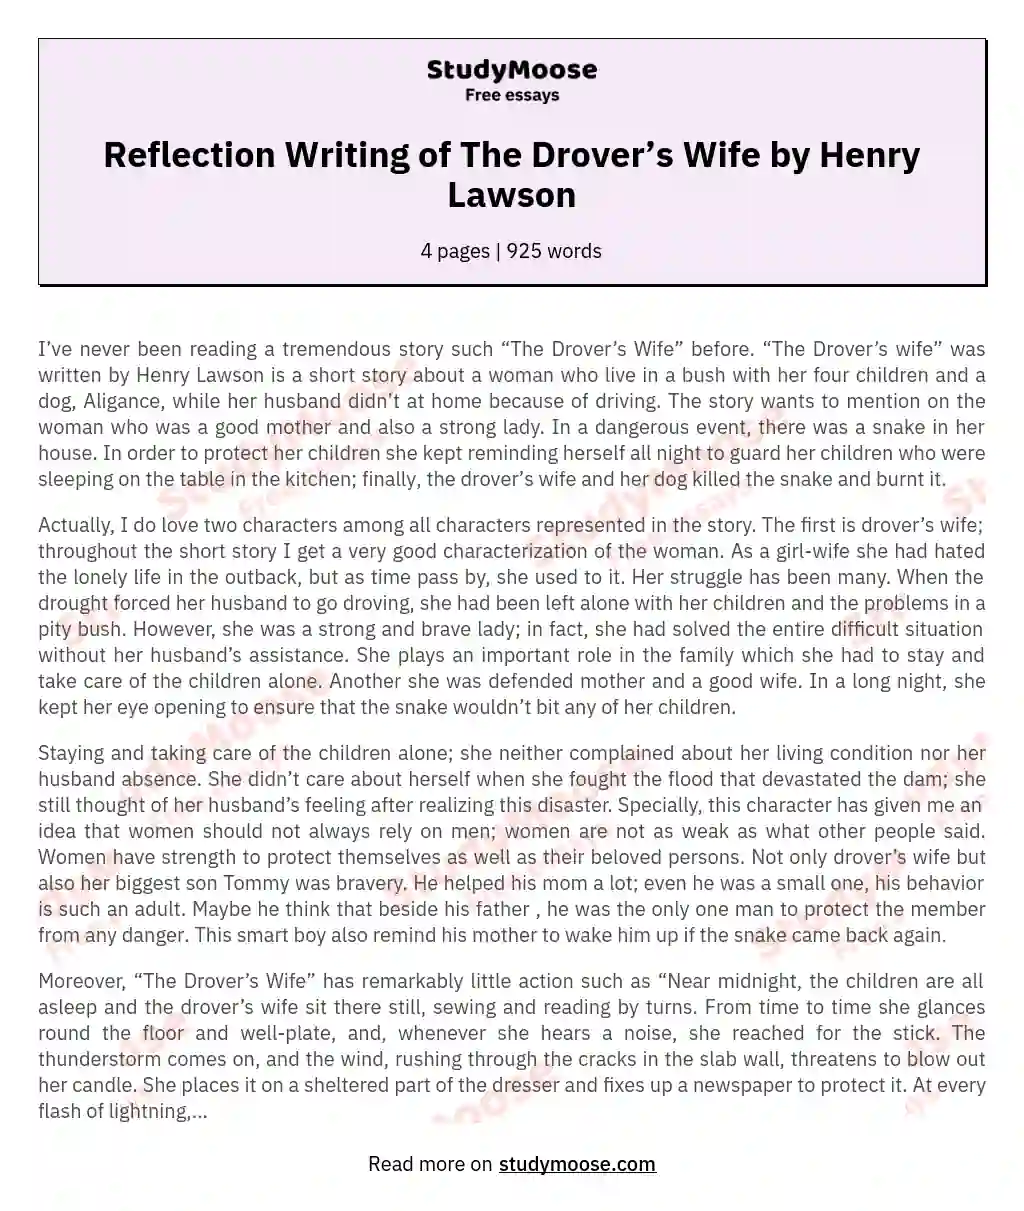 Reflection Writing of The Drover’s Wife by Henry Lawson essay